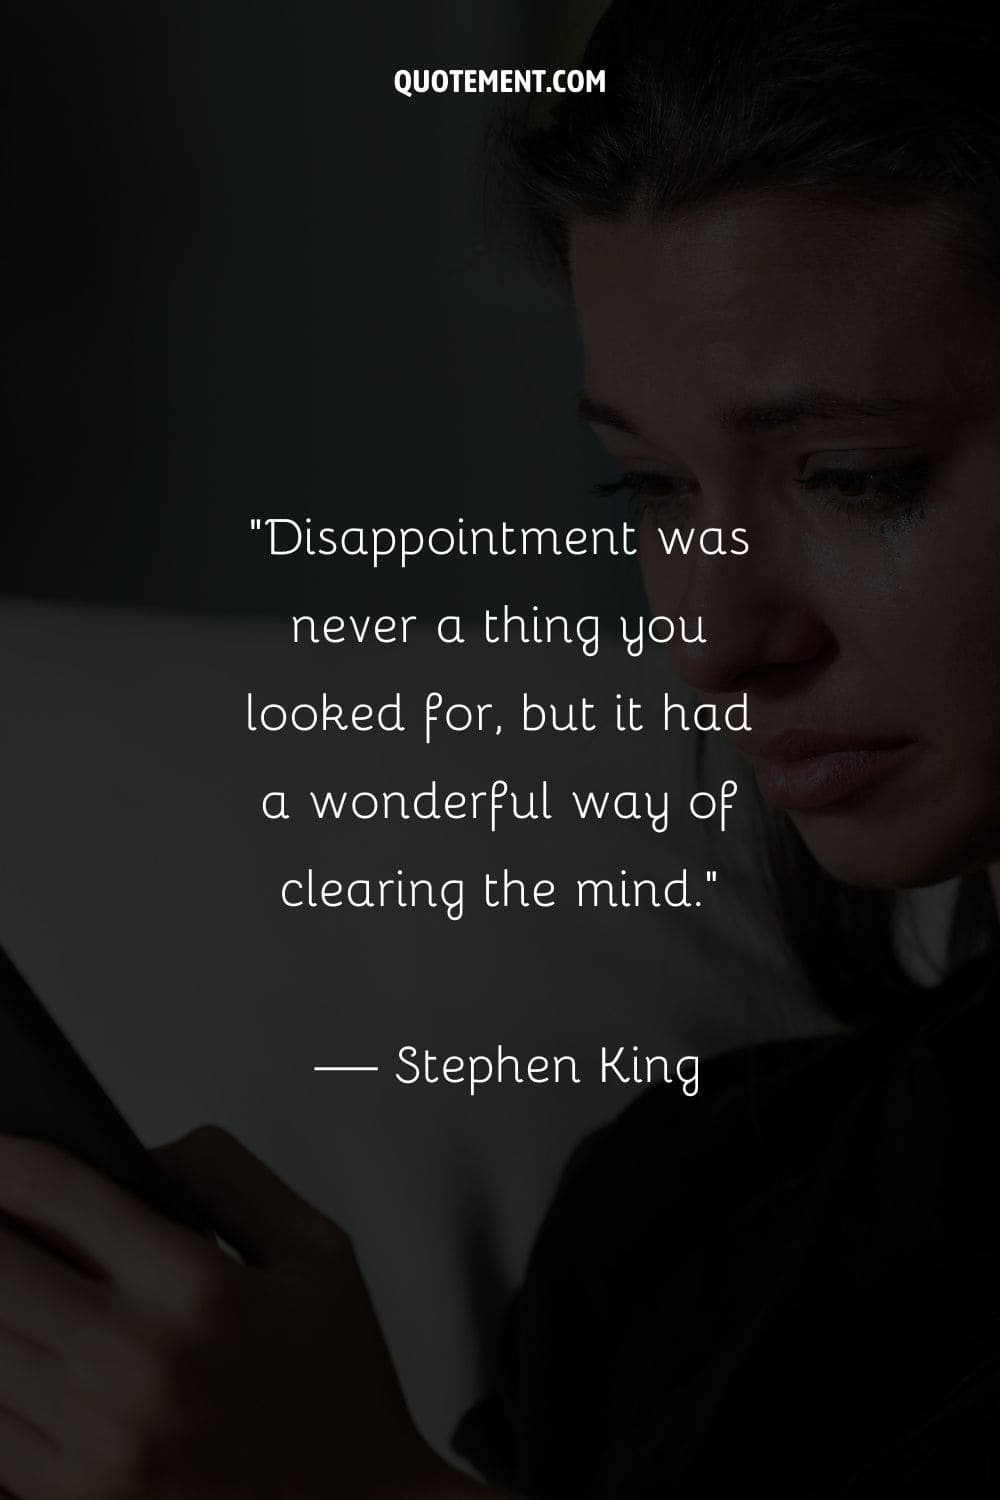 Disappointment was never a thing you looked for, but it had a wonderful way of clearing the mind